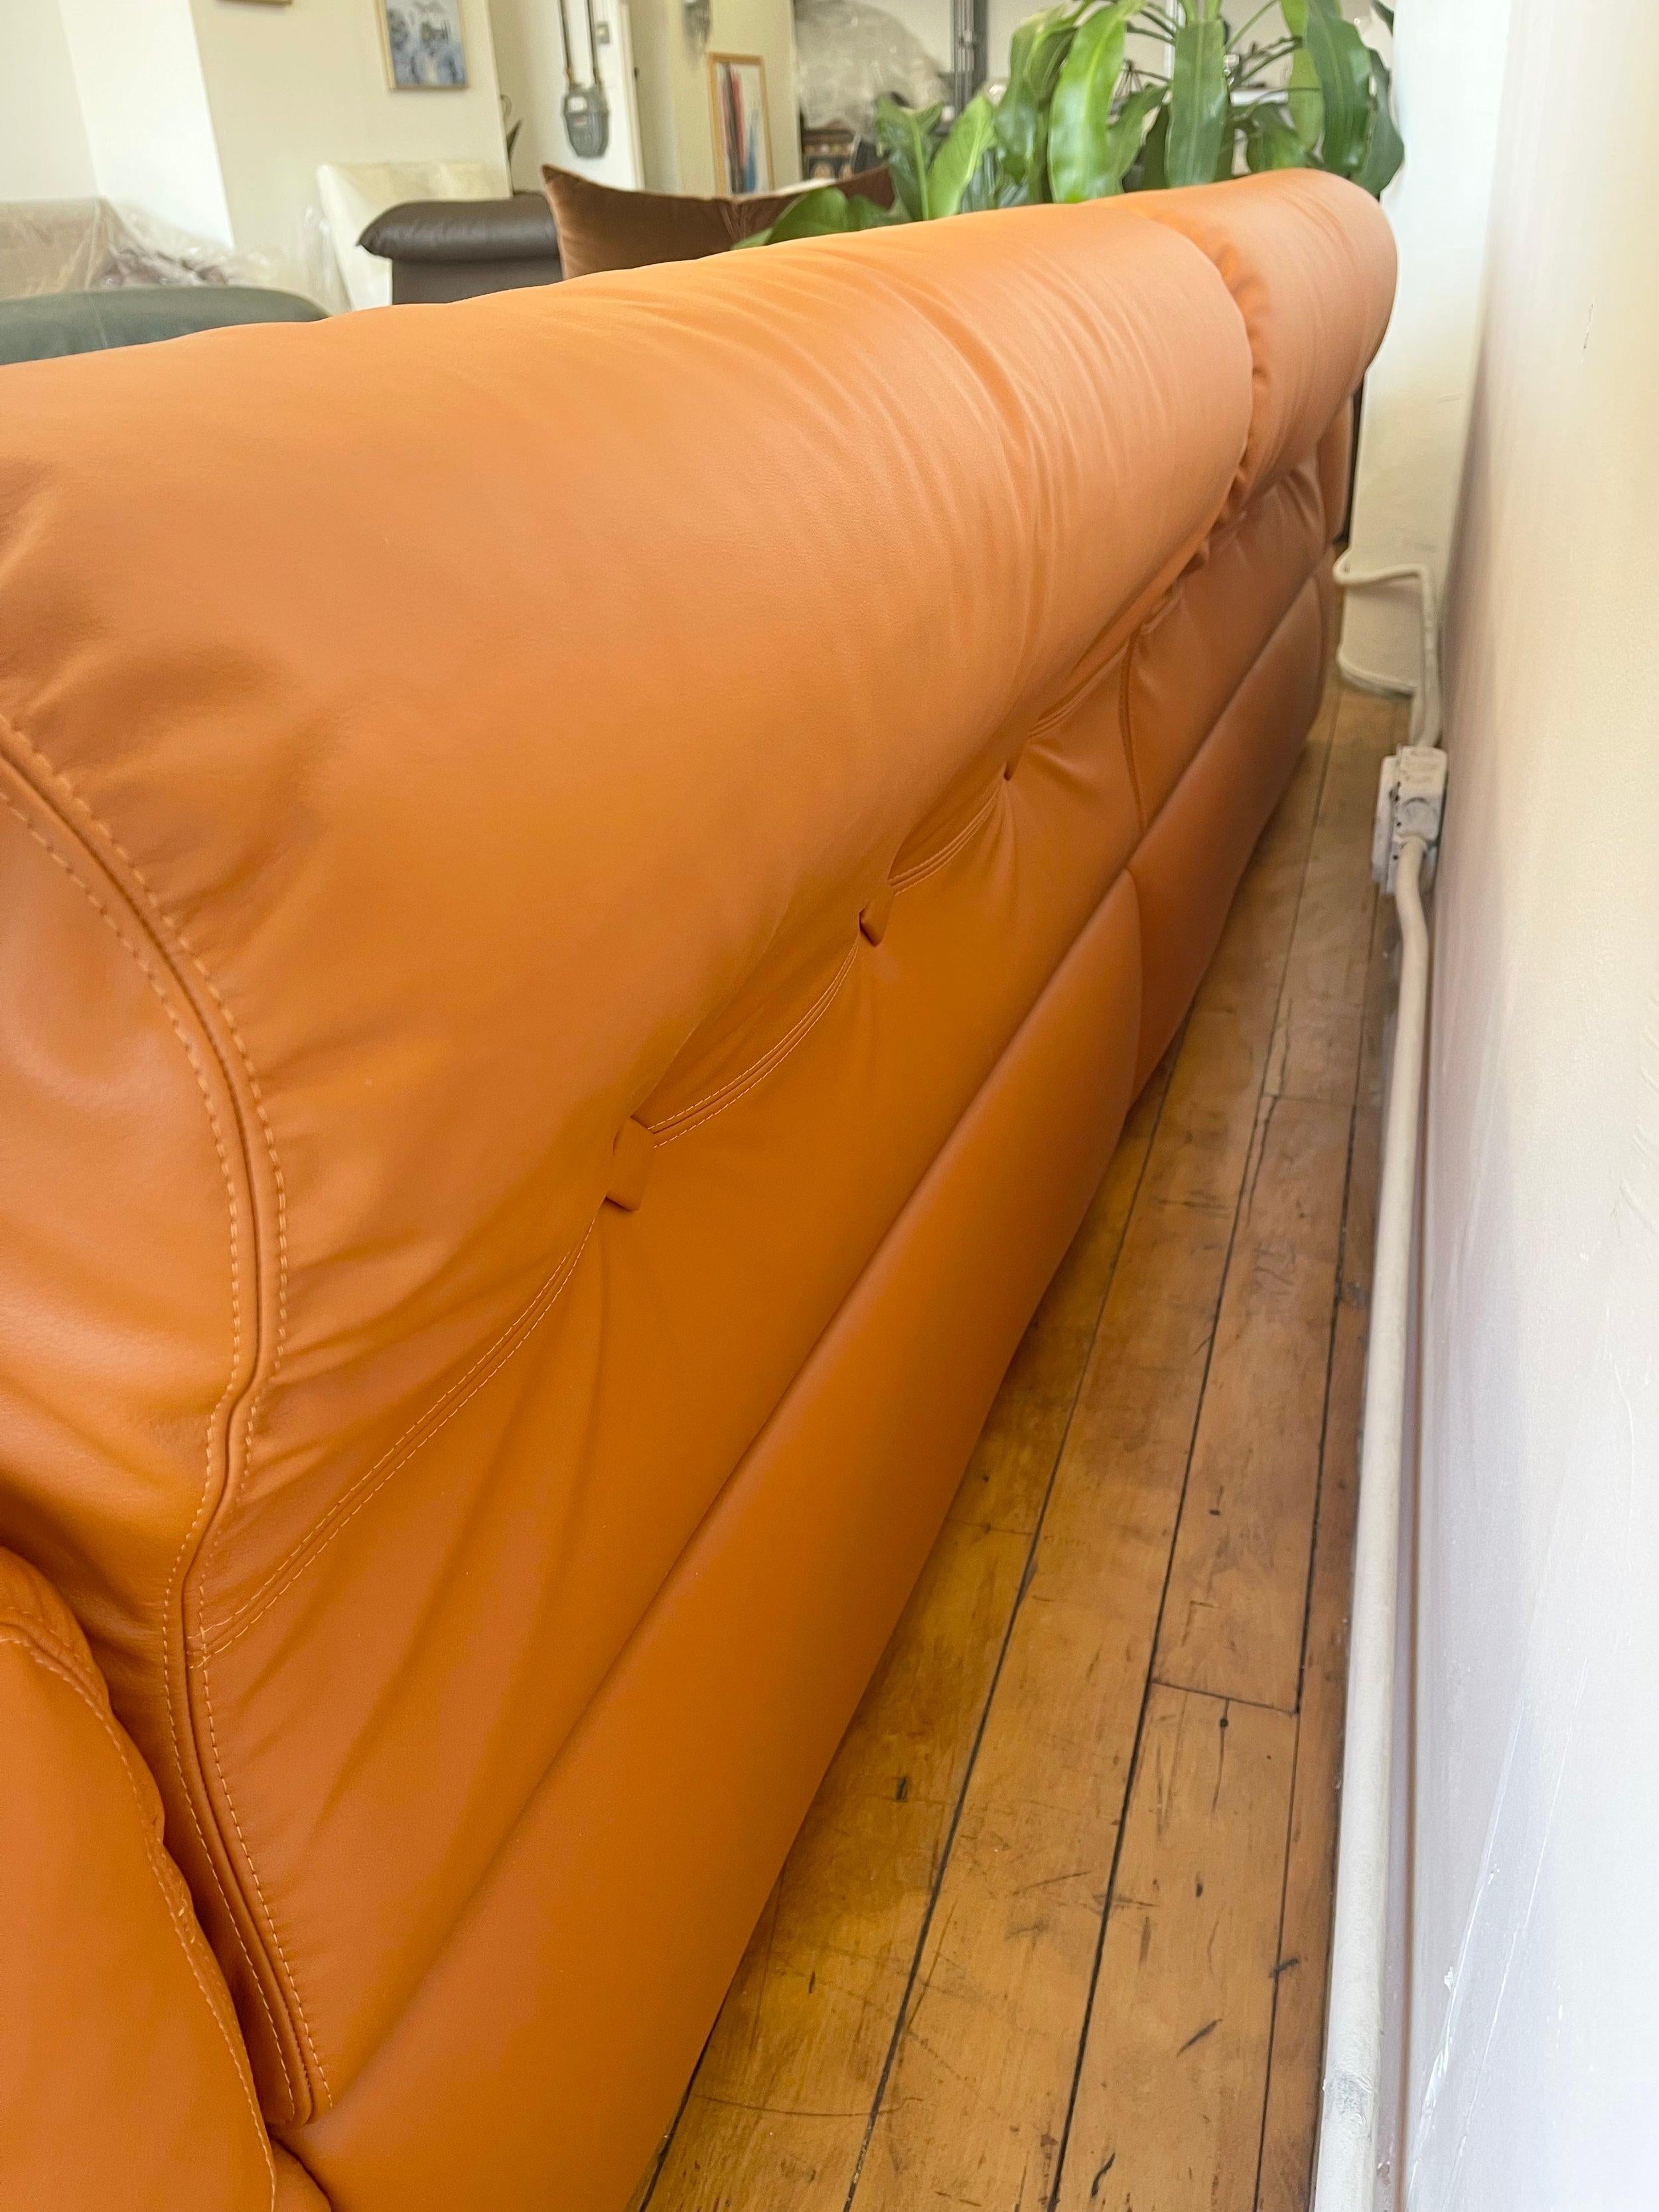 Wood Adriano Piazzesi 1970s Sofa Newly Upholstered with Copper Brown Italian Leather For Sale